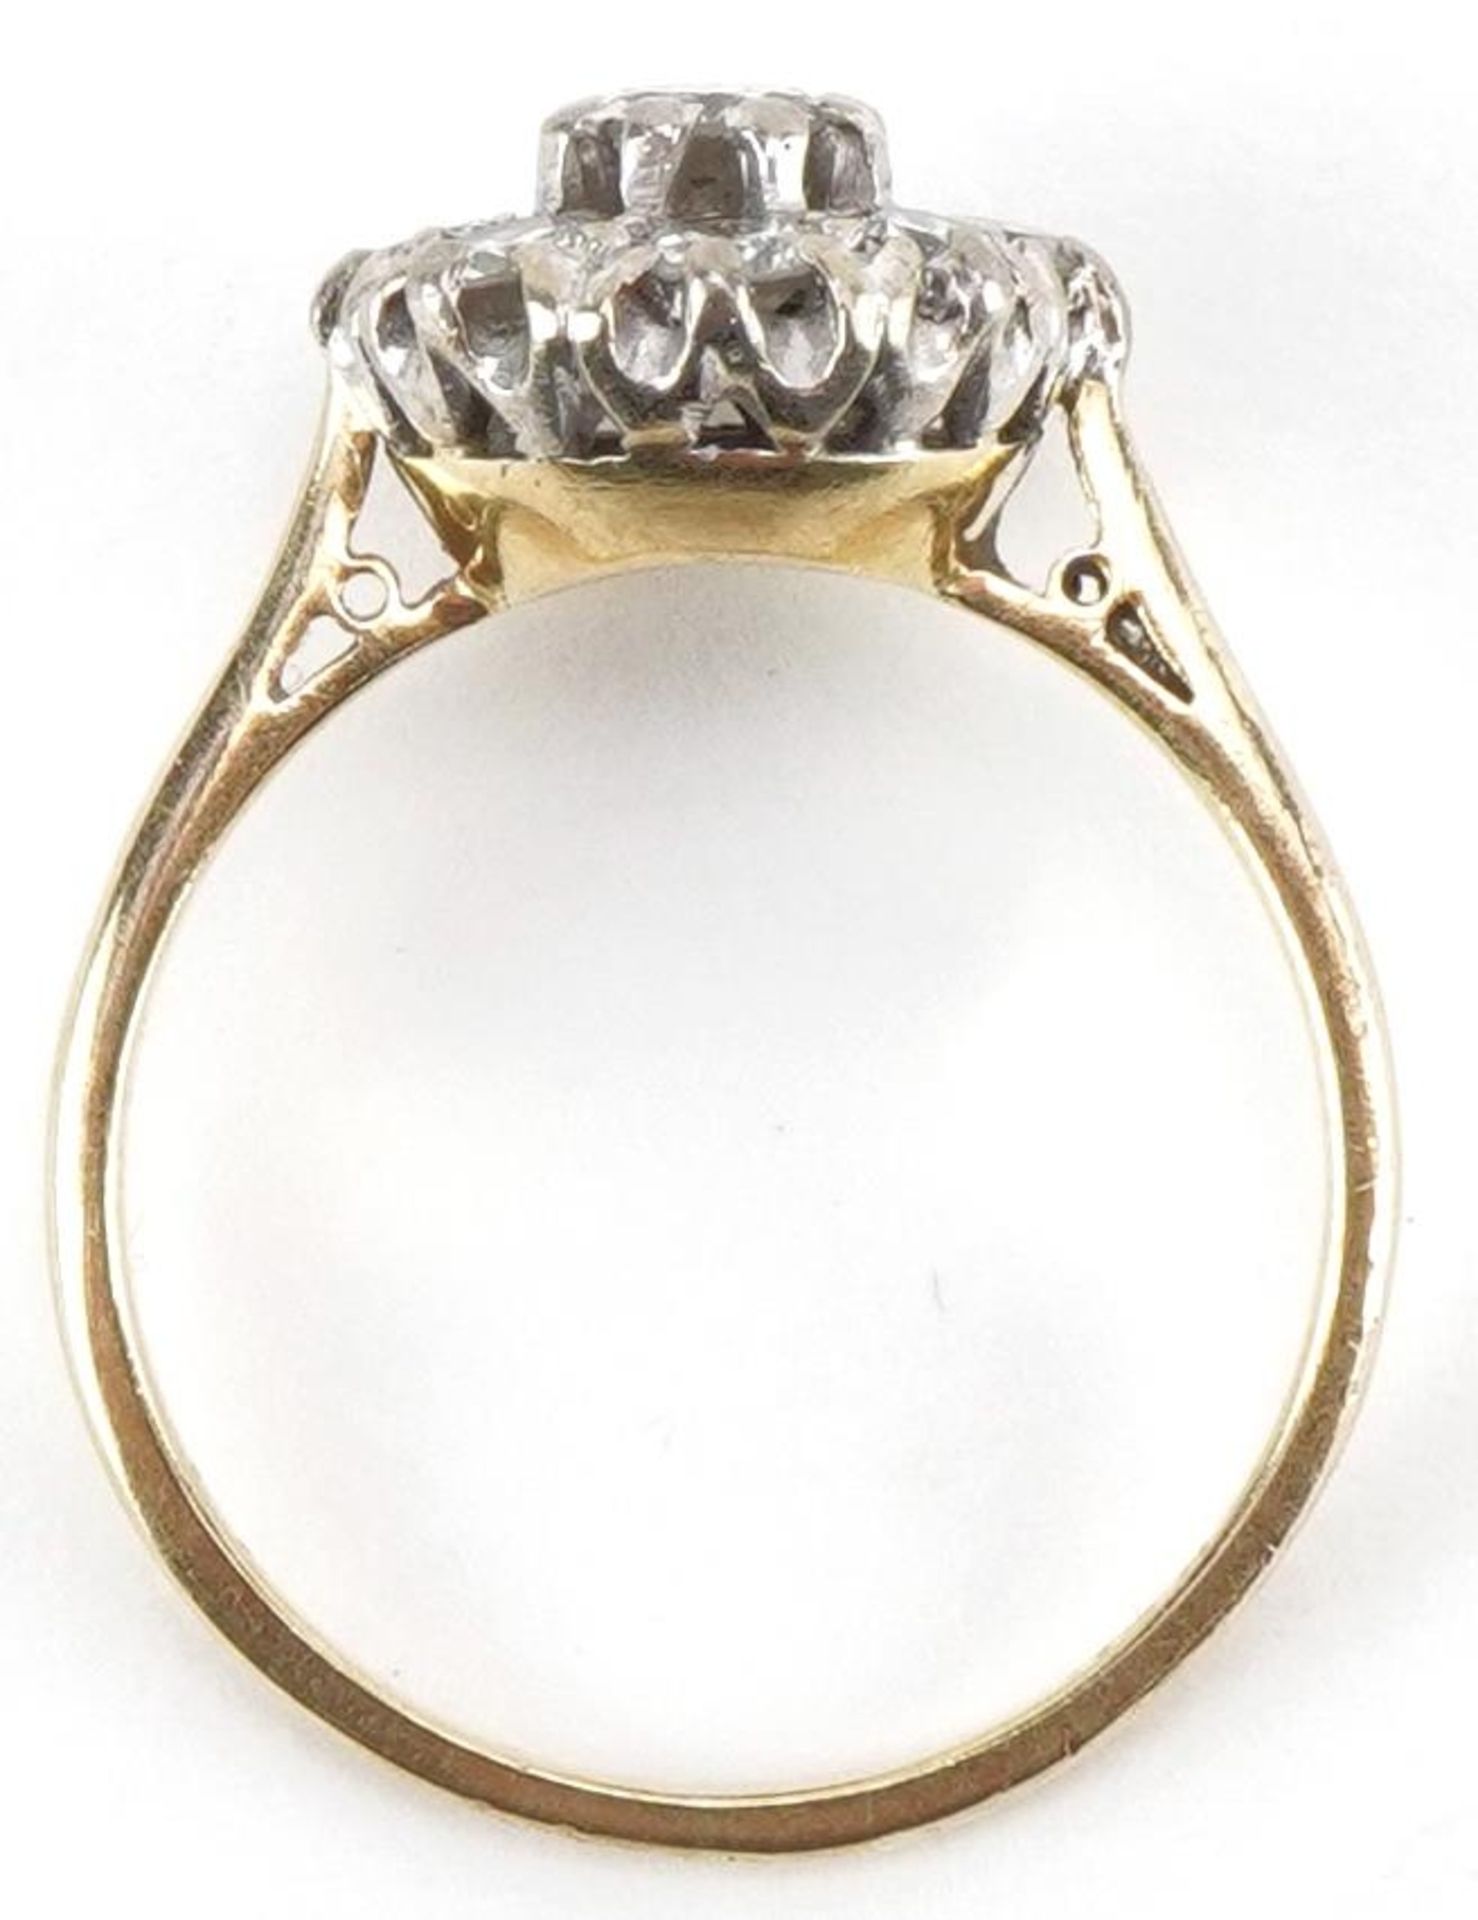 18ct gold diamond cluster ring, the central diamond approximately 0.20 carat, size N, 3.6g - Image 3 of 4